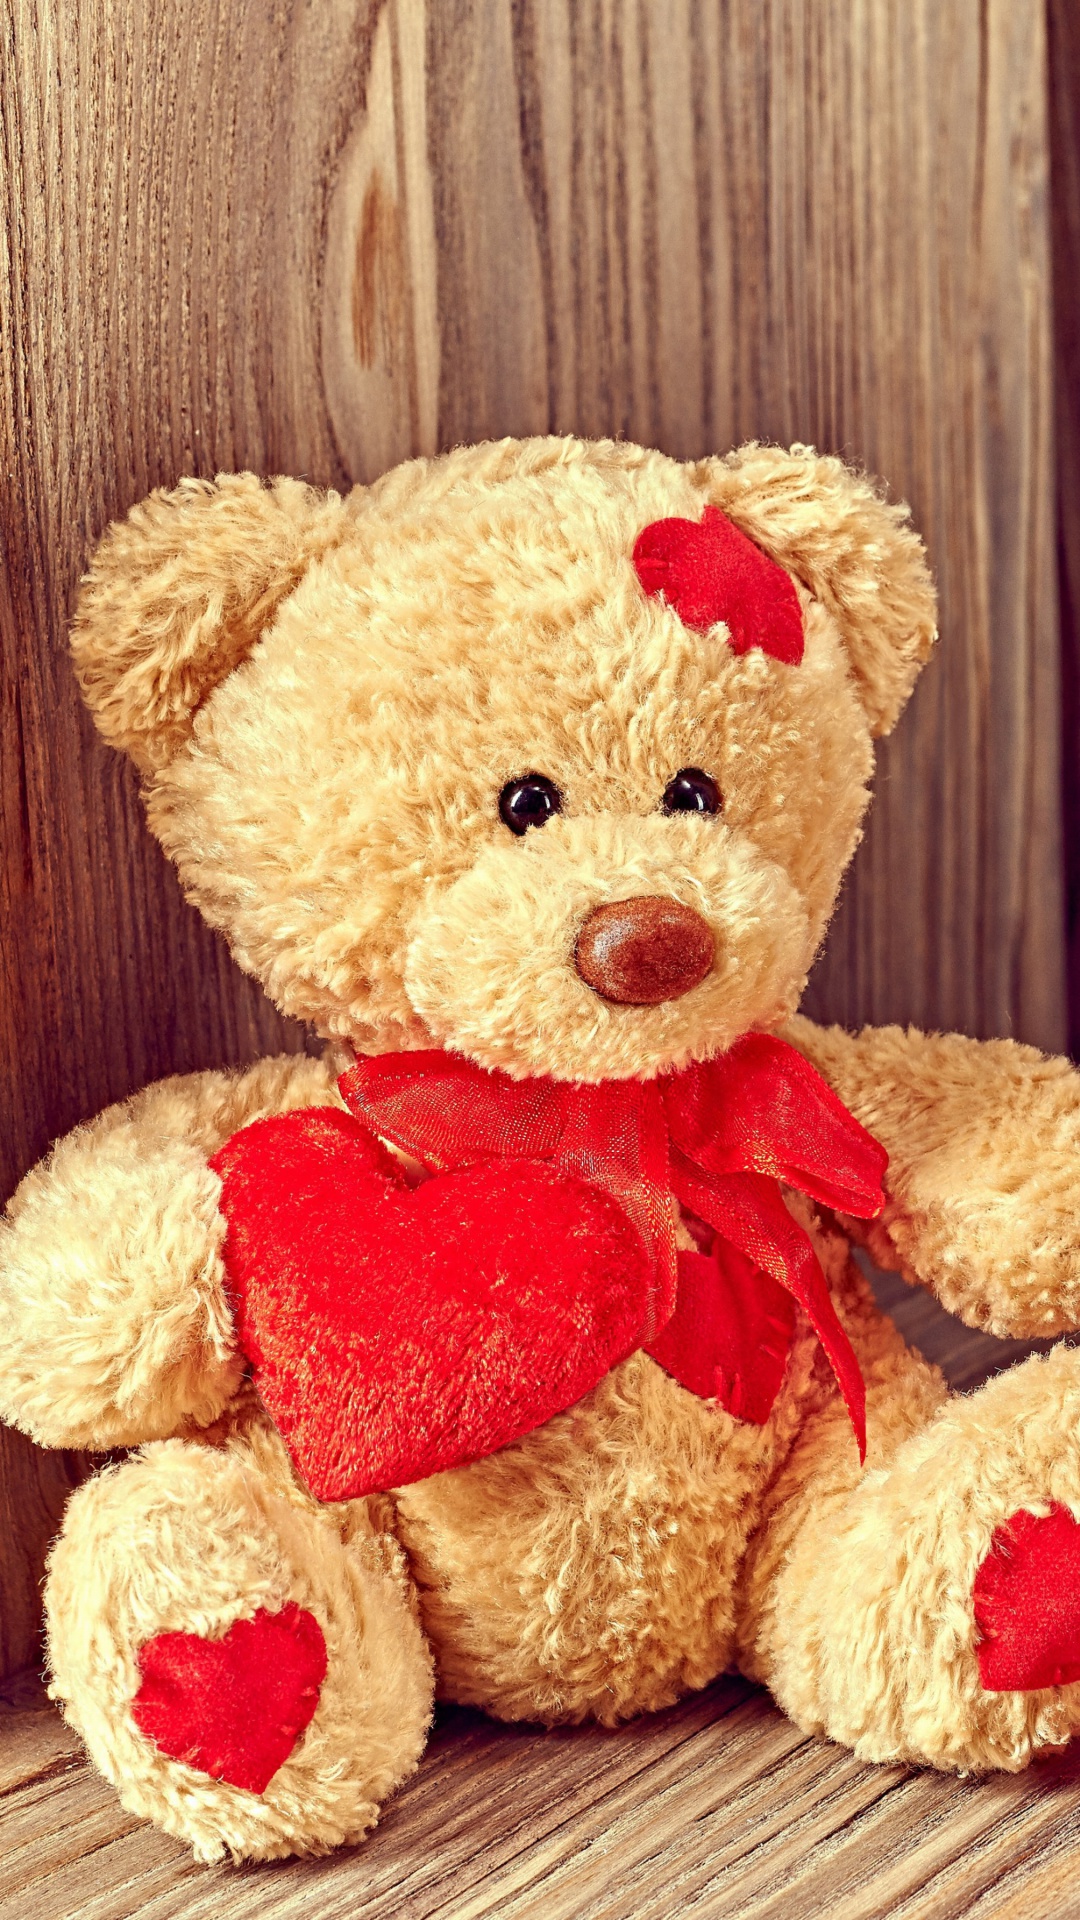 Brodwn Teddy Bear Gift for Saint Valentines Day wallpaper 1080x1920